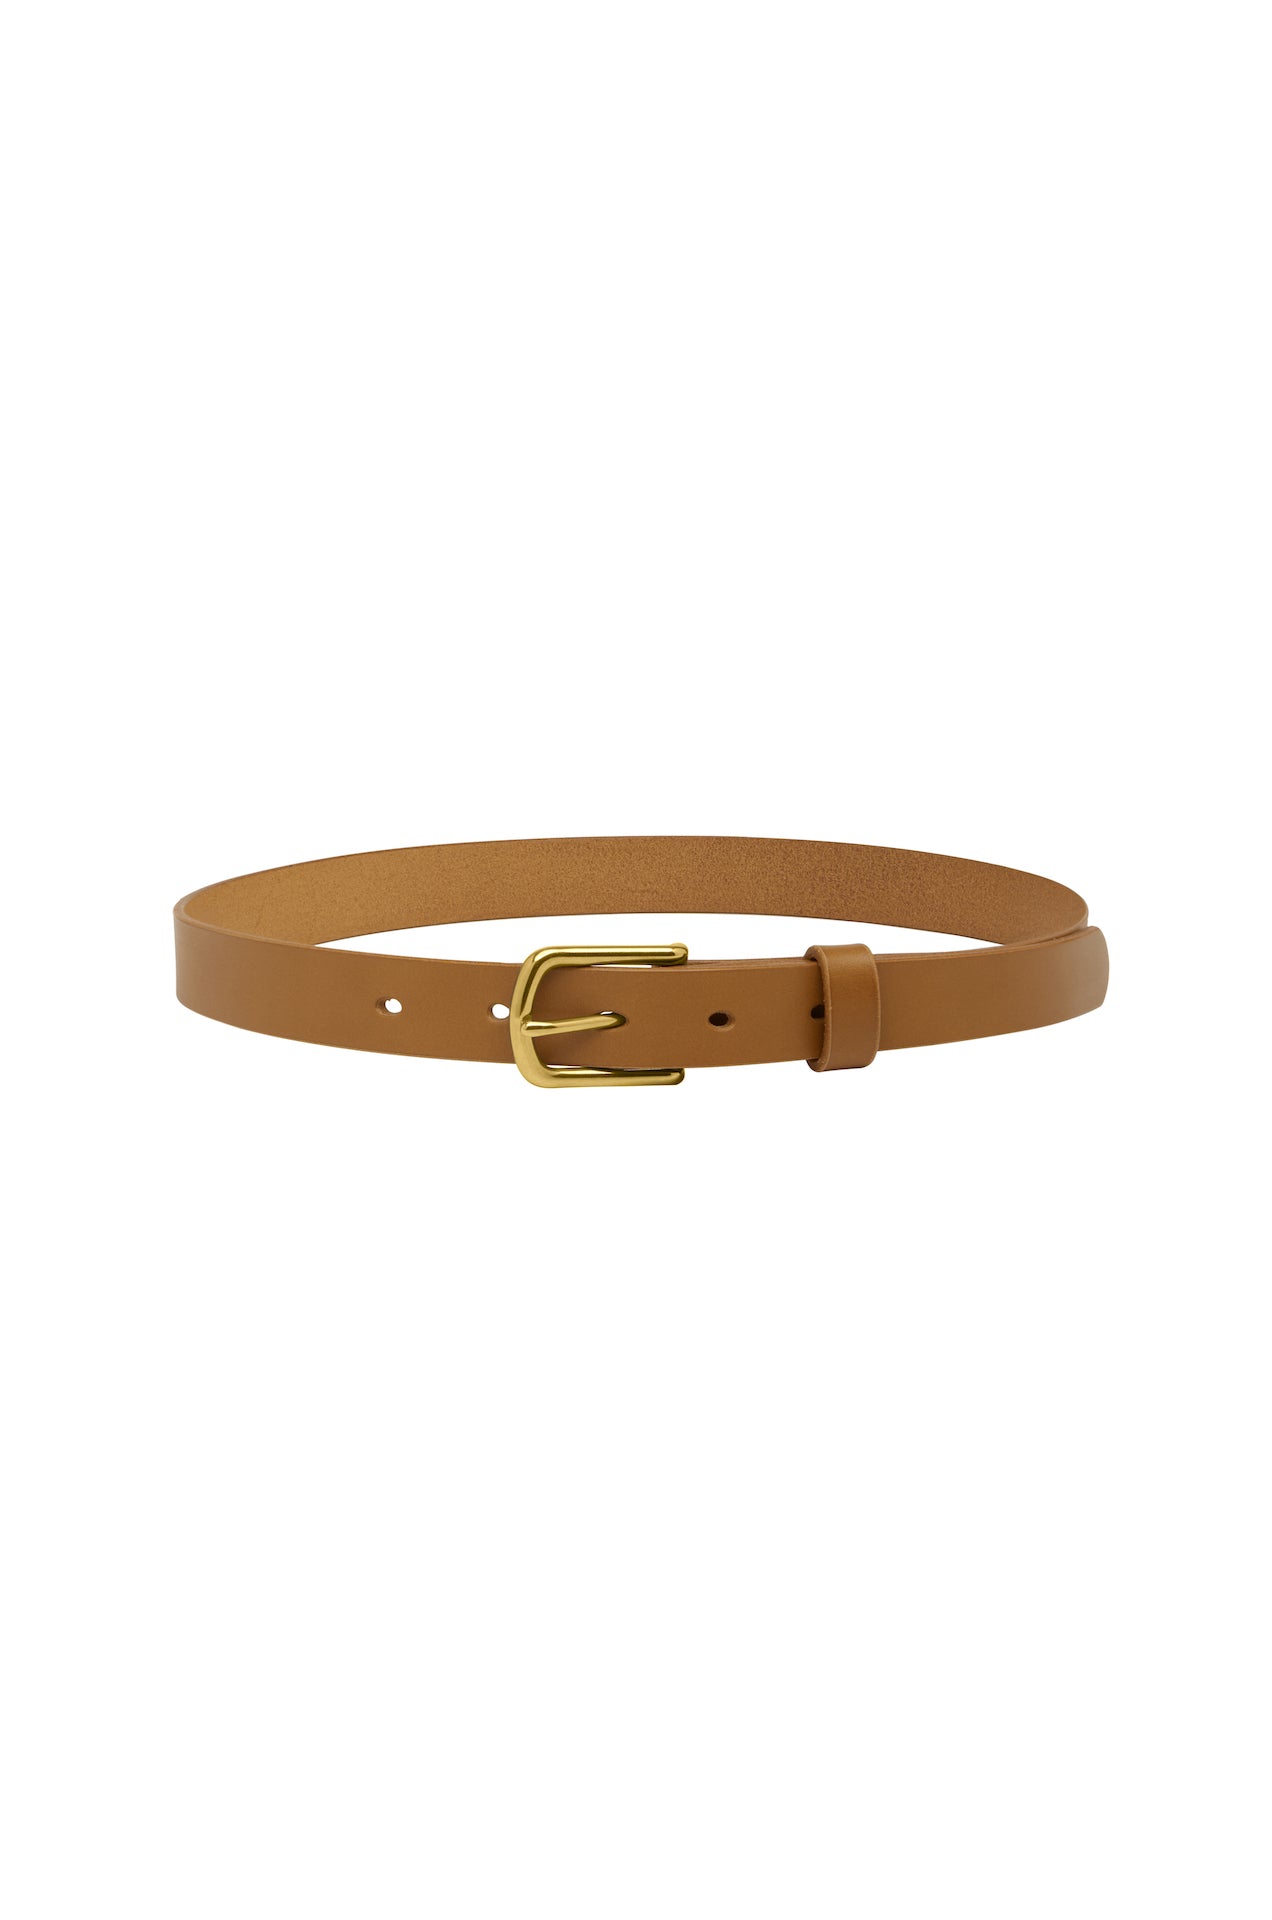 SAINT classic leather belt in tan leather with solid brass buckle. made in Australia using traditional leather smith techniques. 100% Italian leather